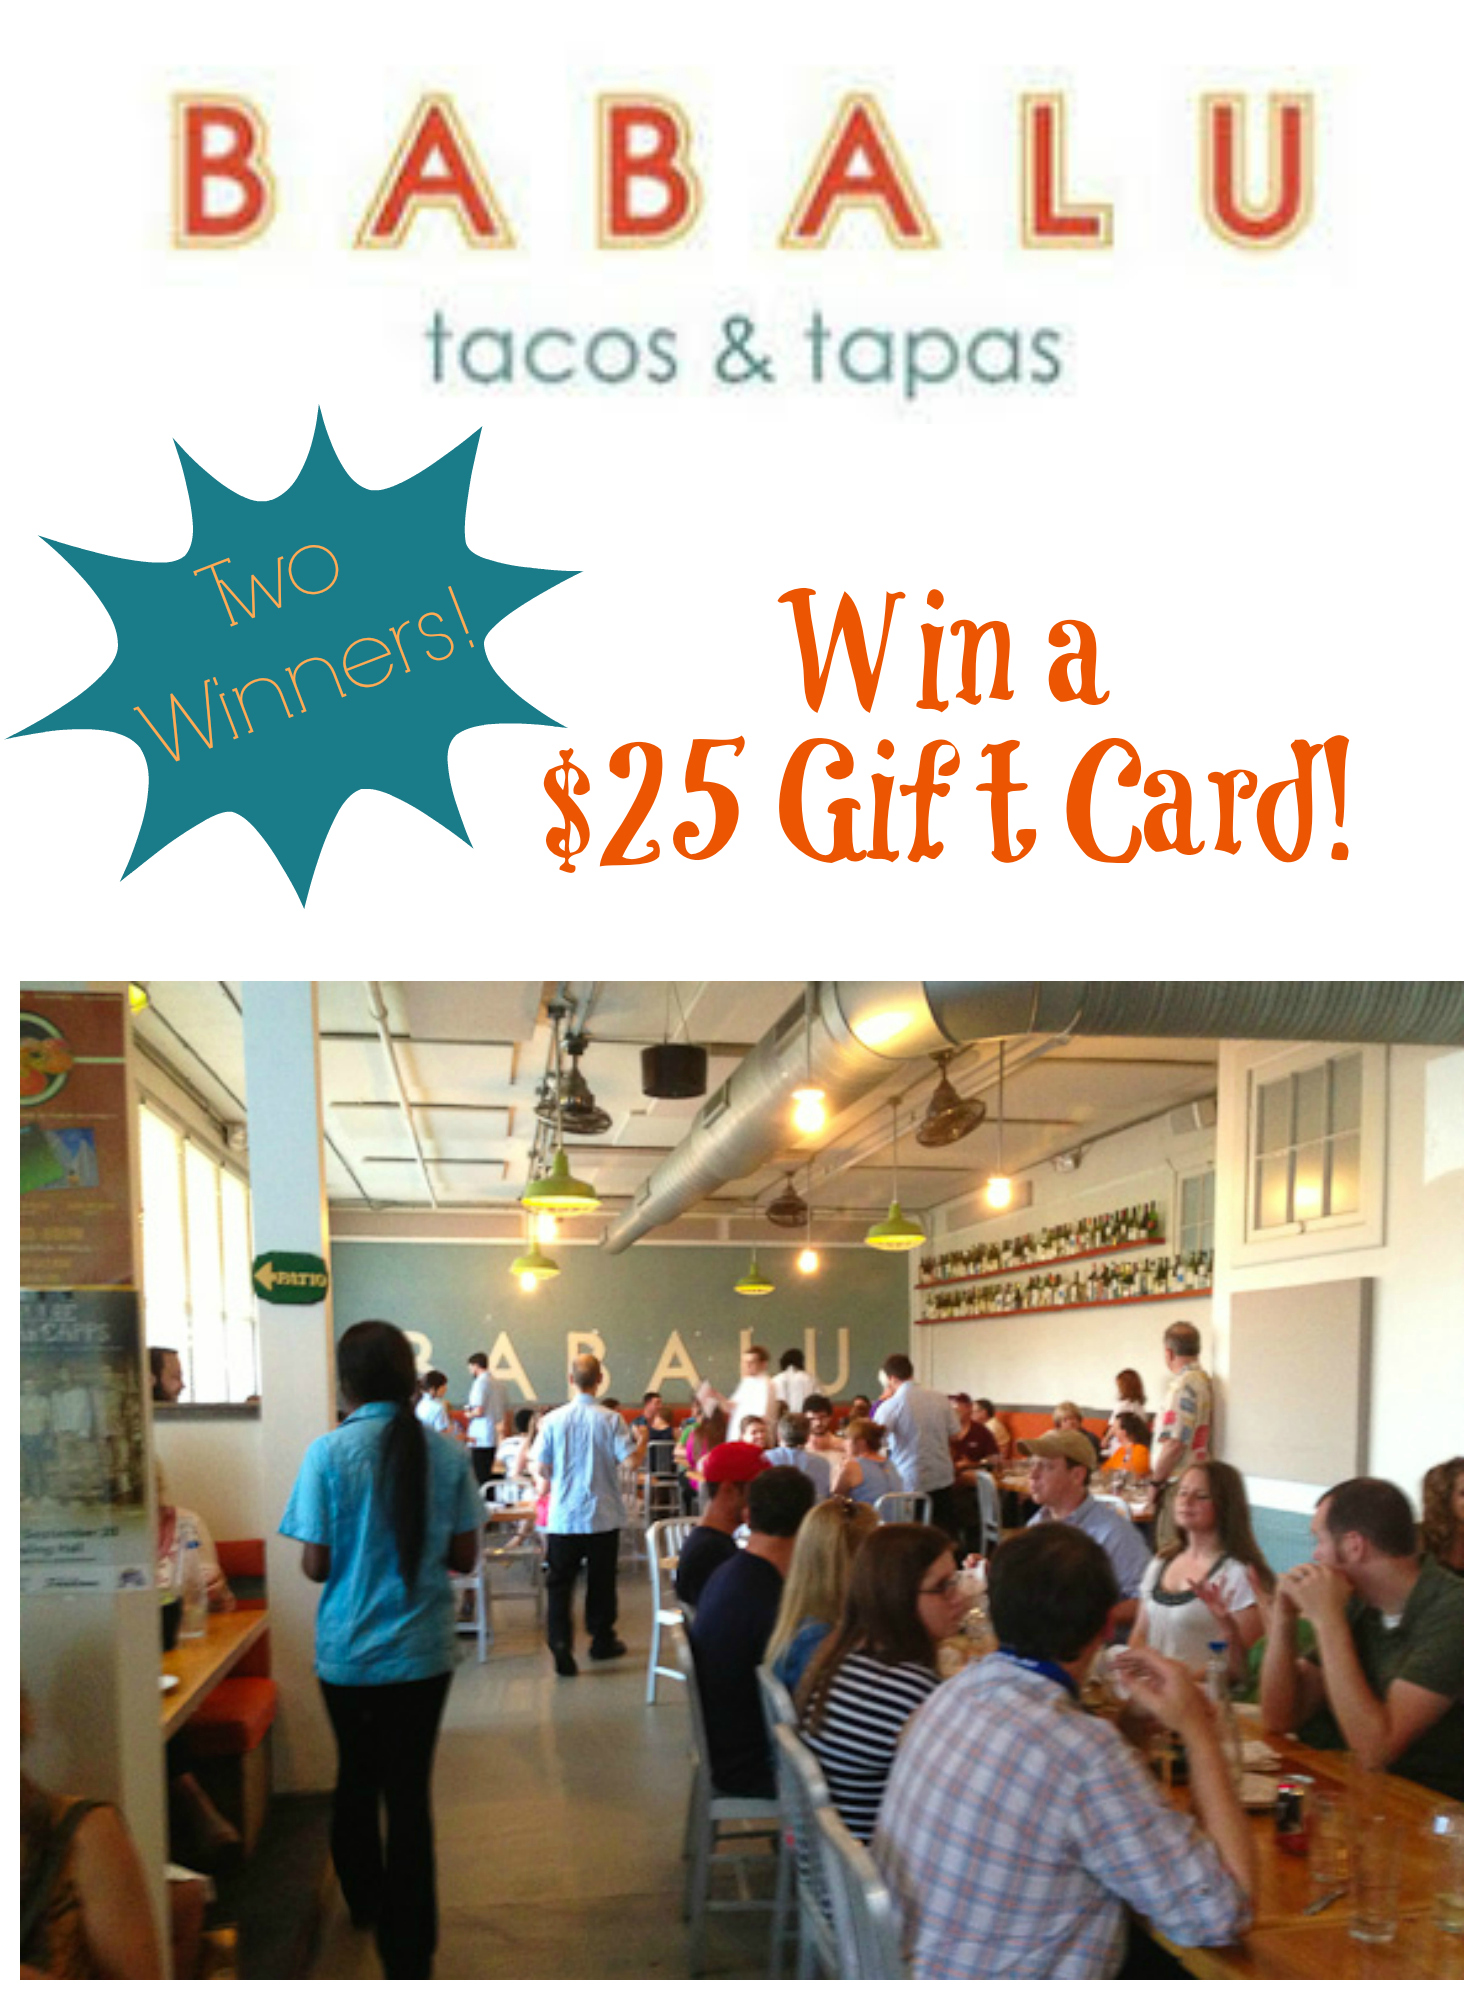 Enter to win one of two $25 gift cards at Babalu Tacos & Tapas in Jackson, MS - SeededAtTheTable.com